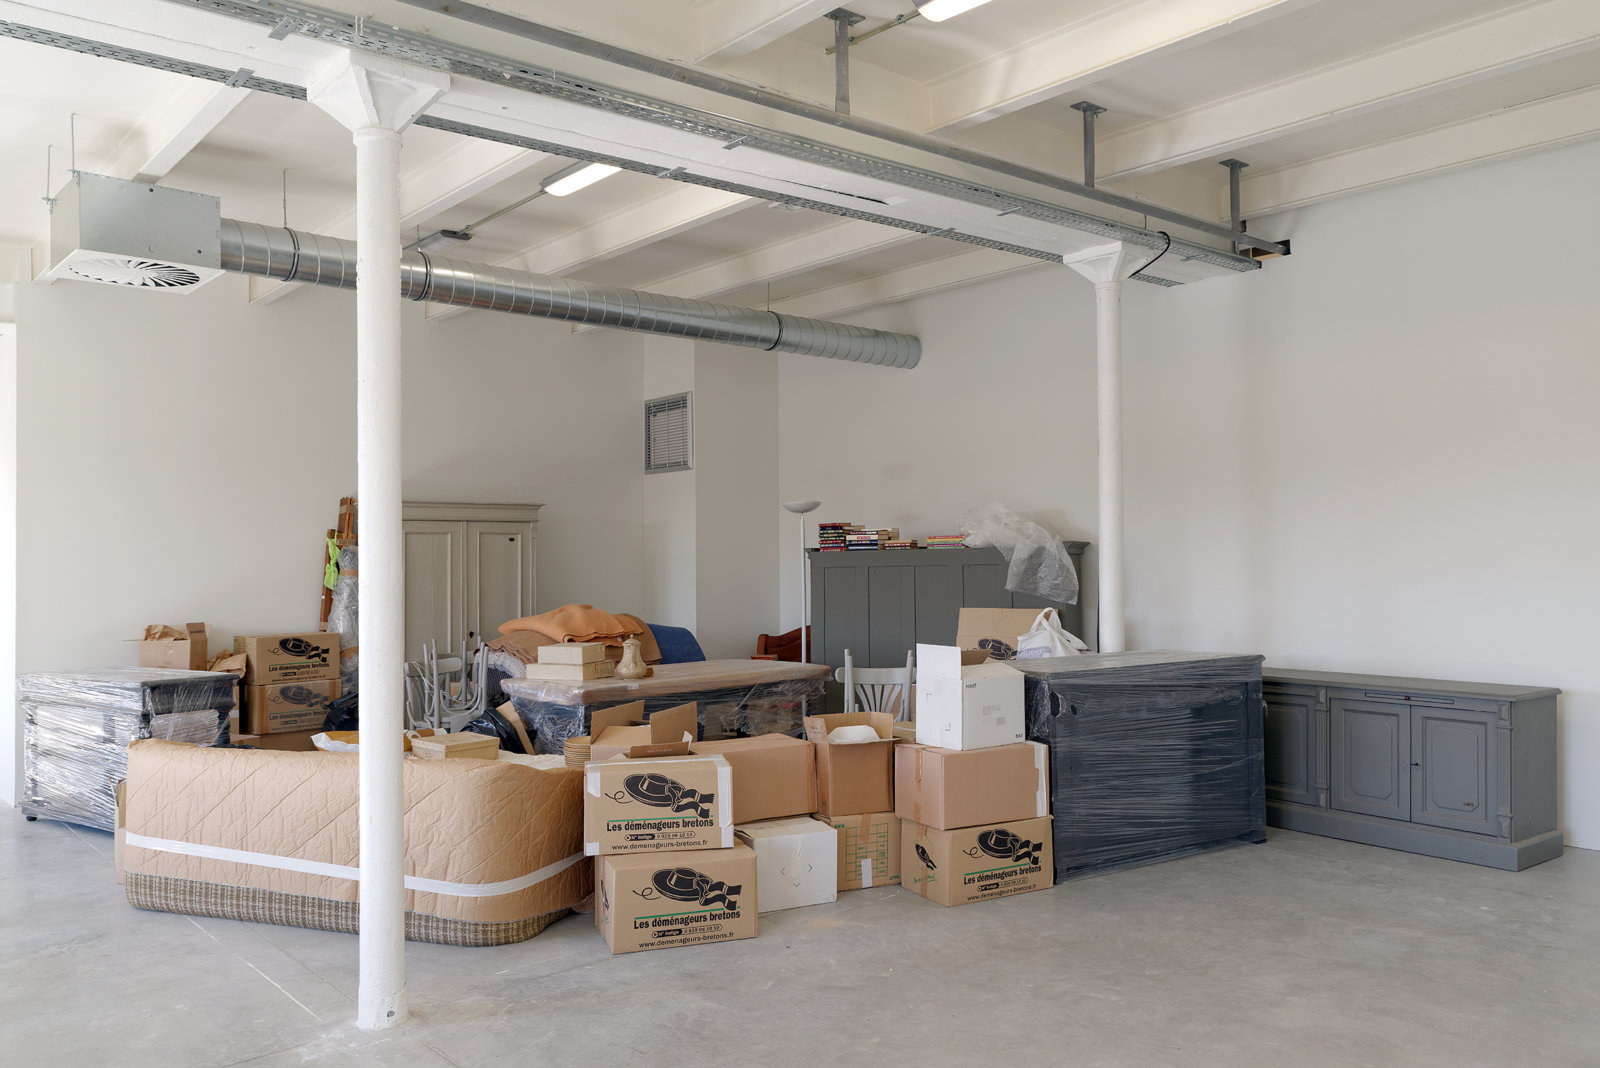 Liz Magor, One Bedroom Apartment, 1996, polyester resin, contents of a one-bedroom apartment, dimensions variable. Installation view, No	Fear,	No	Shame,	No	Confusion,	Triangle	France,	Marseille,	France, 2013